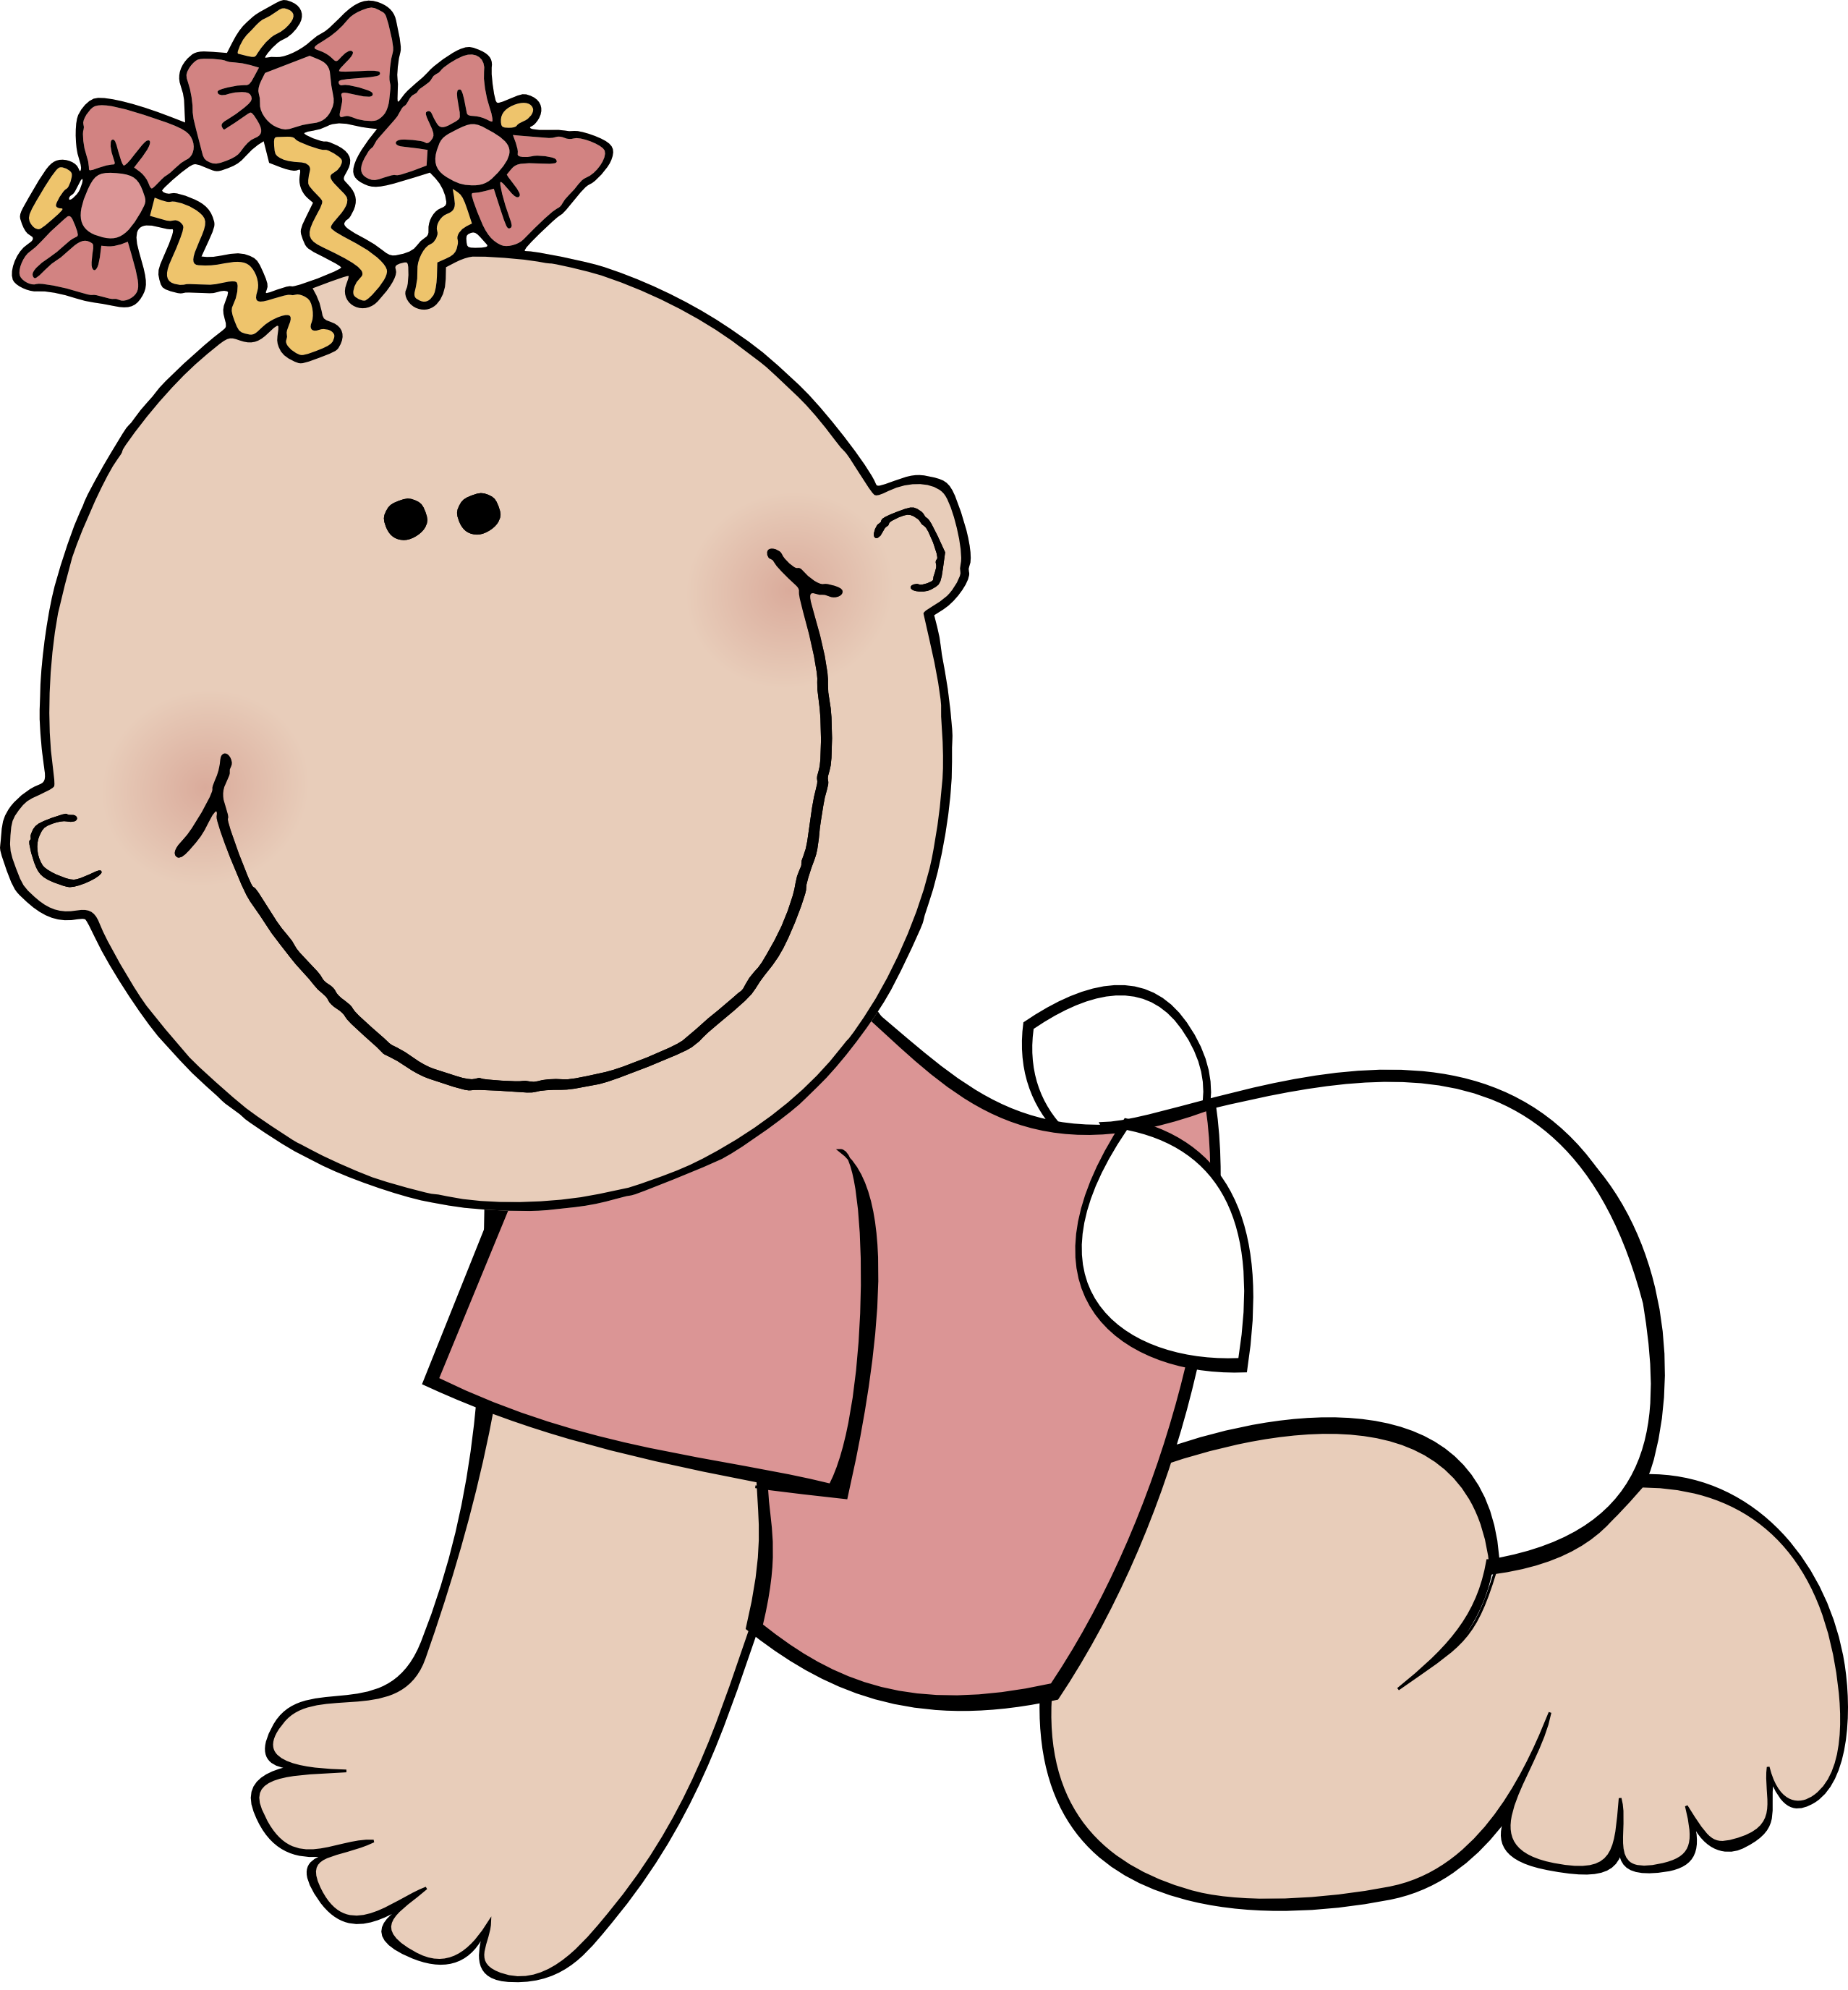 New baby images clip art